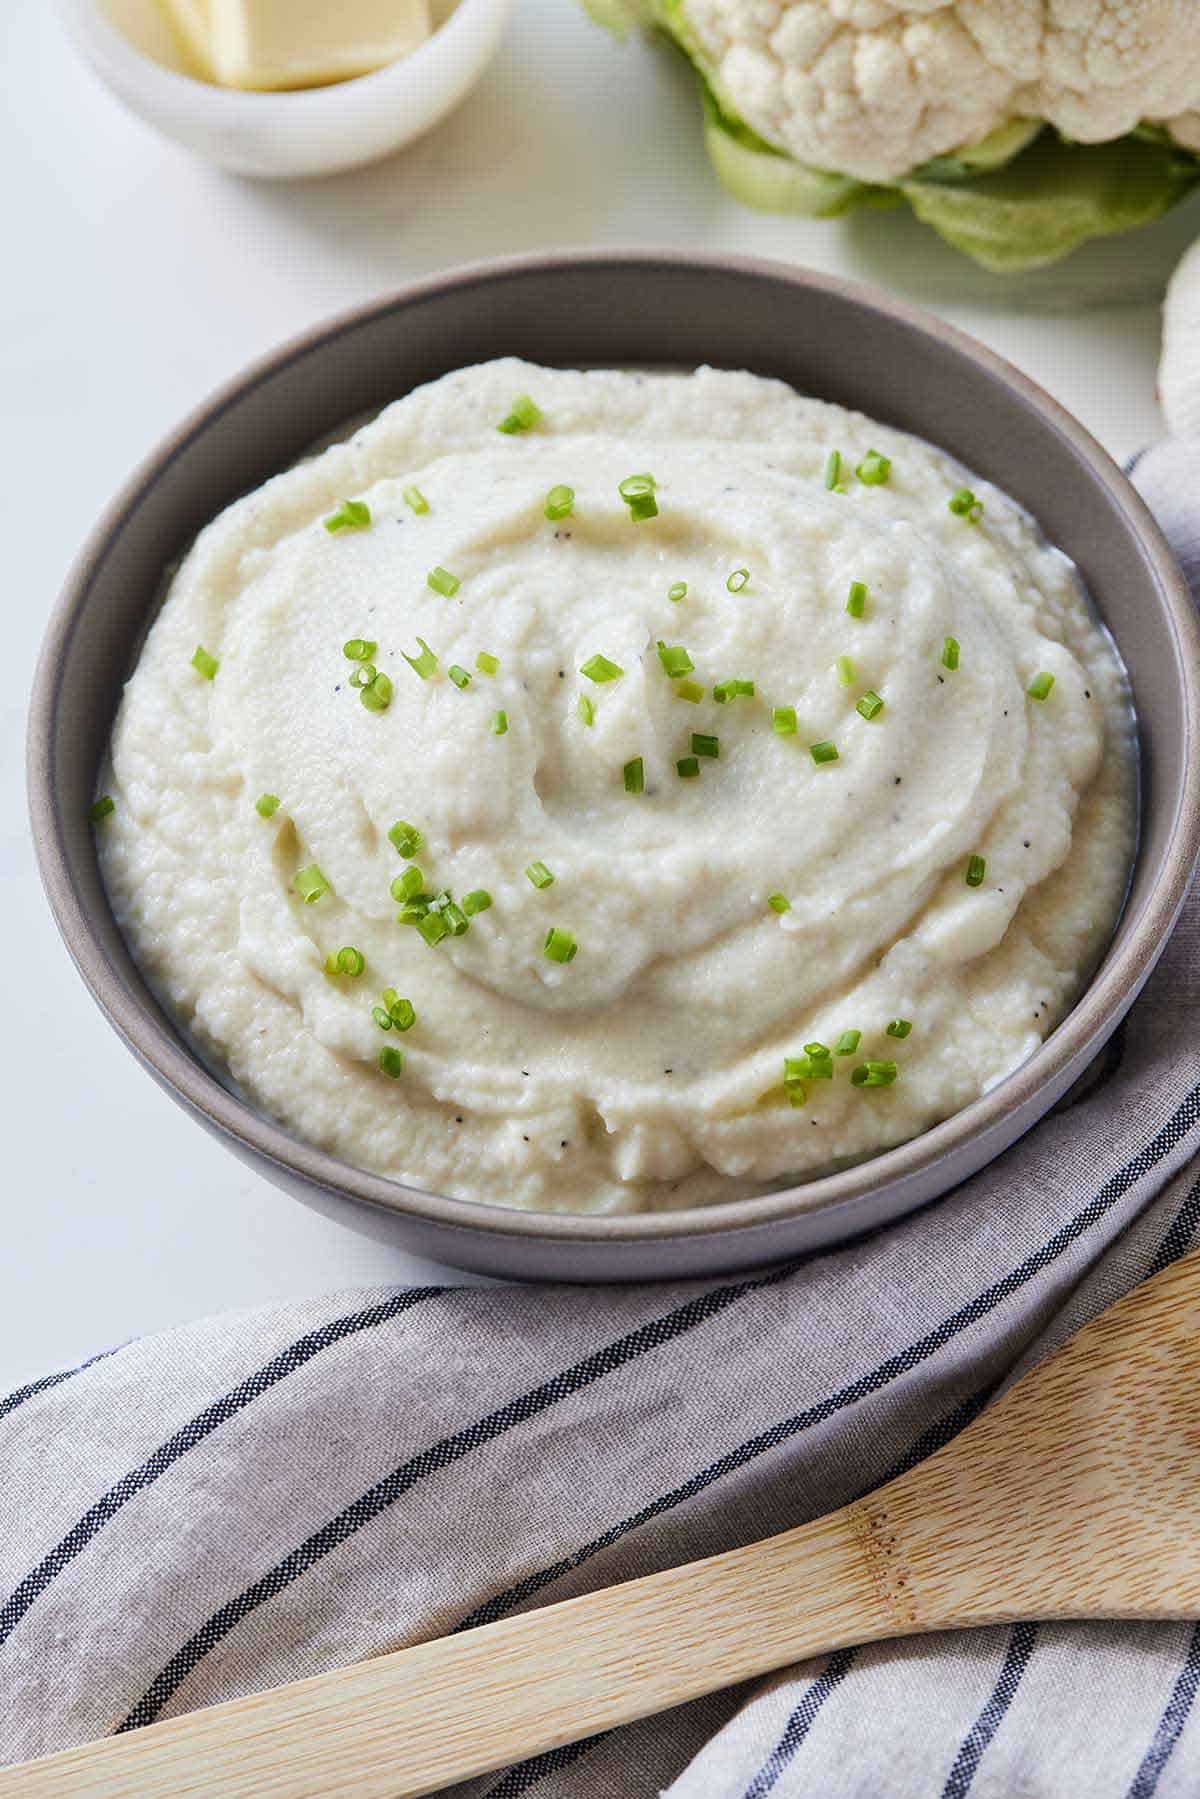 A bowl of mashed cauliflower with chives on top by a linen napkin and wooden spoon beside it.